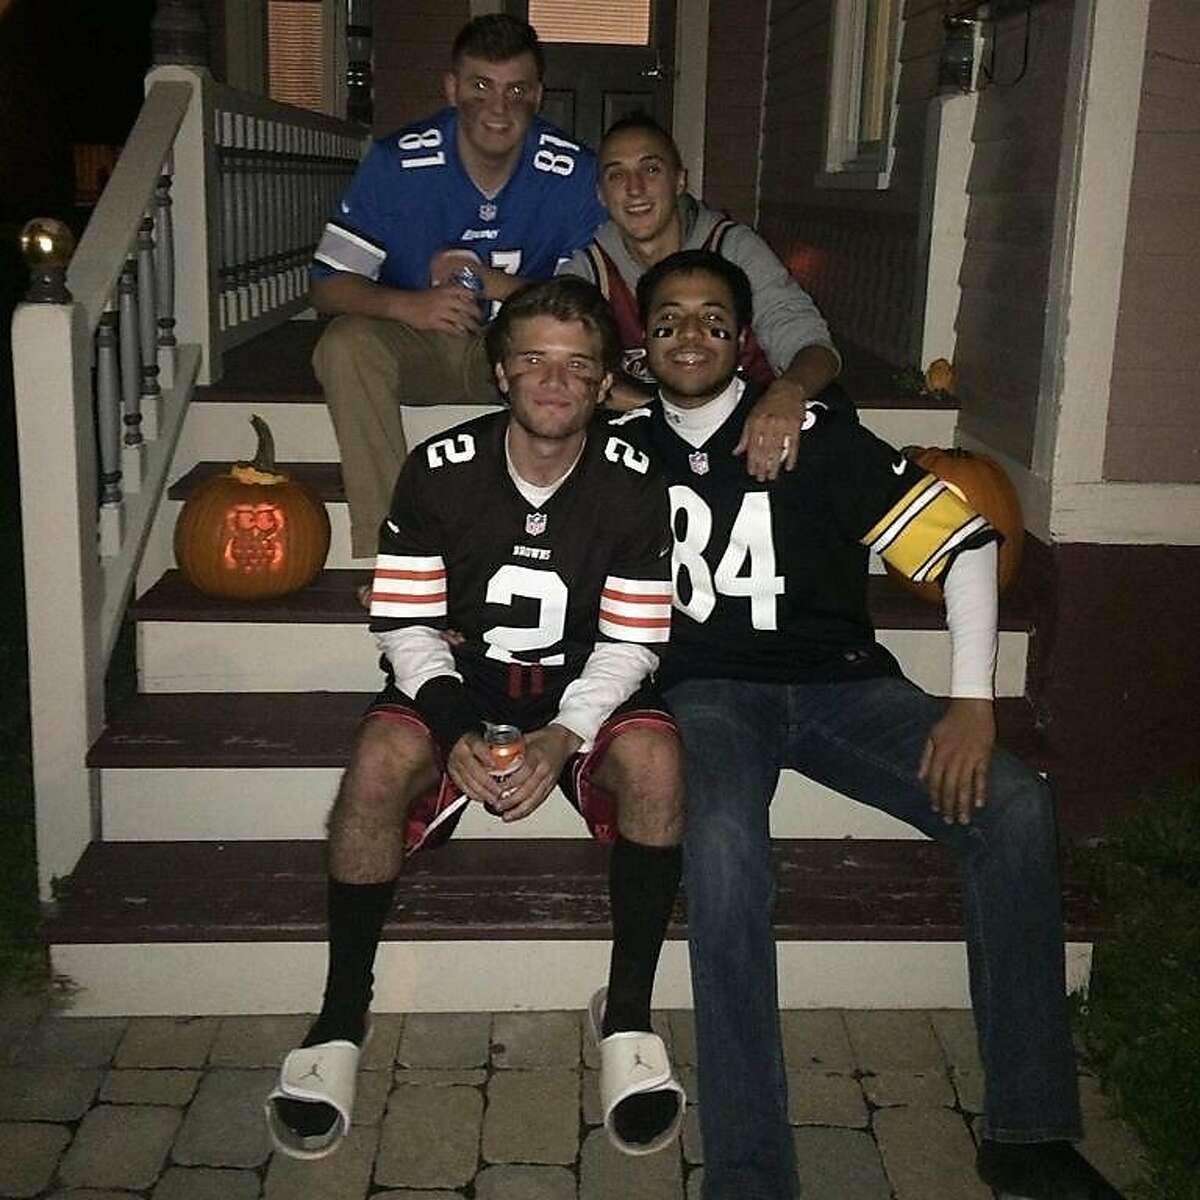 Trevor Irby celebrating Halloween with friends. Top left to right: Steven Wyrosdick, Ben Schreiber. Bottom left to right: Matt Hey, Trevor Irby